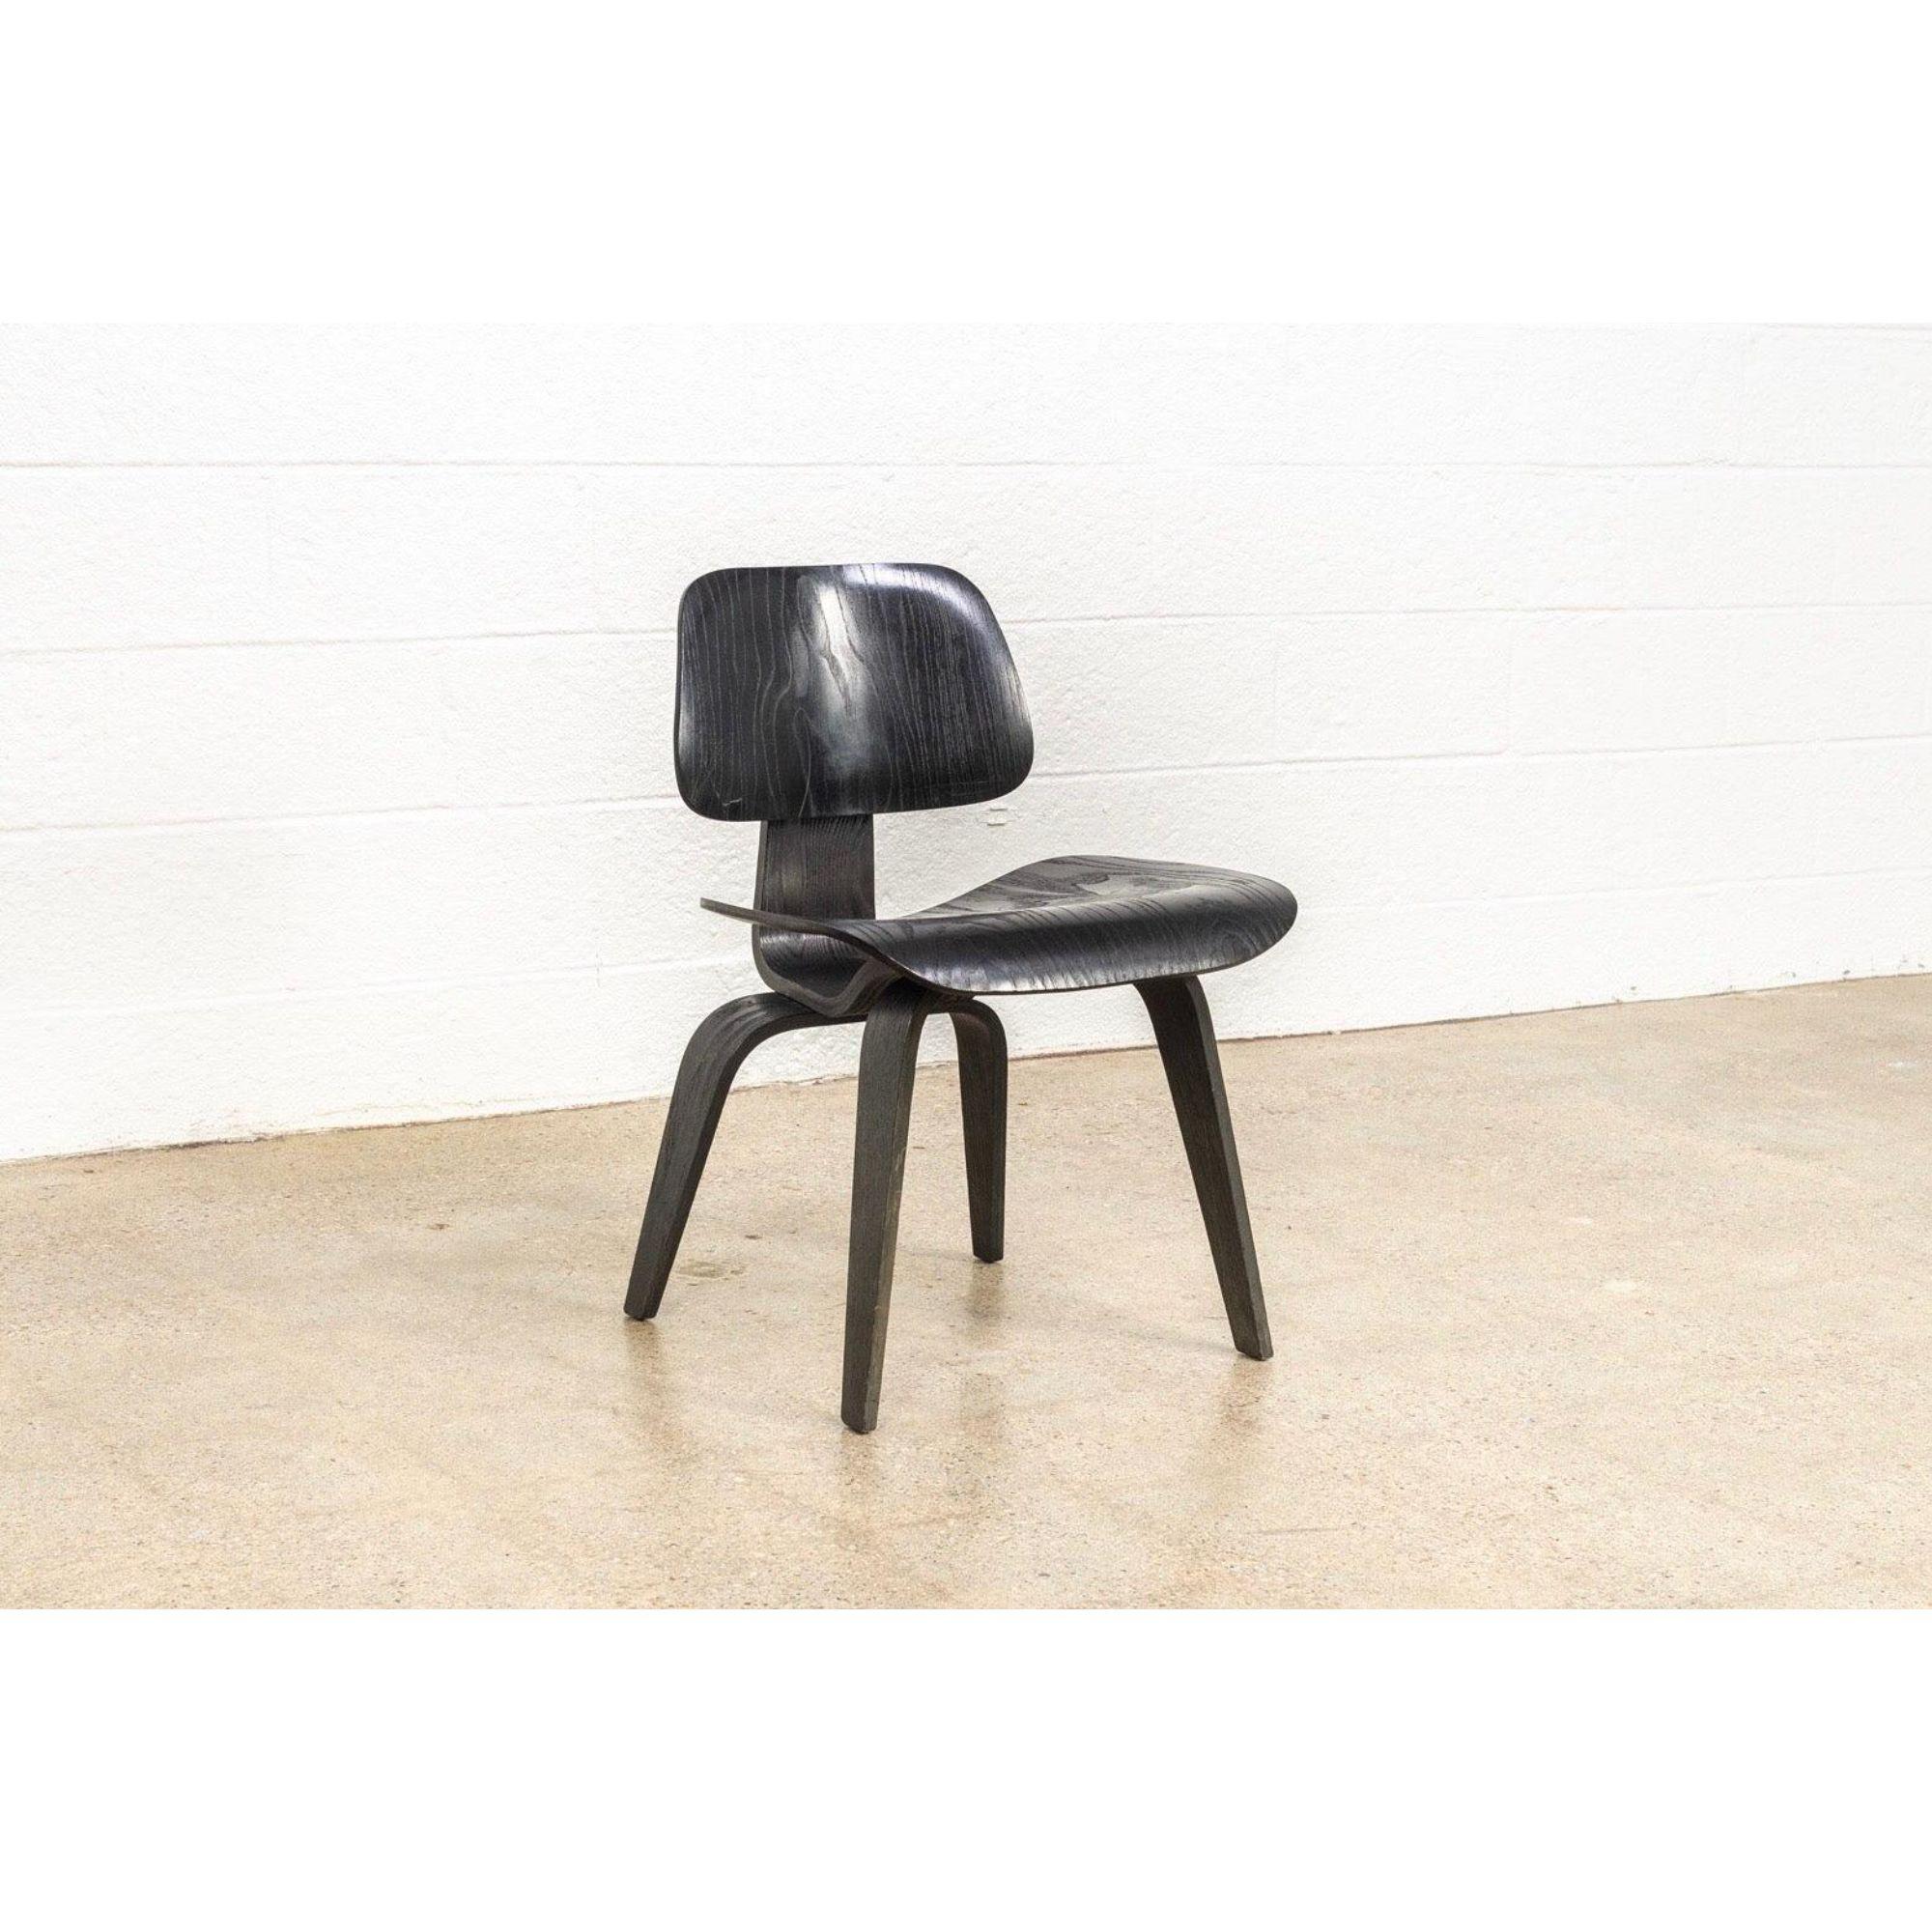 American Vintage Midcentury Eames Black Dcw Plywood Dining Chair, 1950s